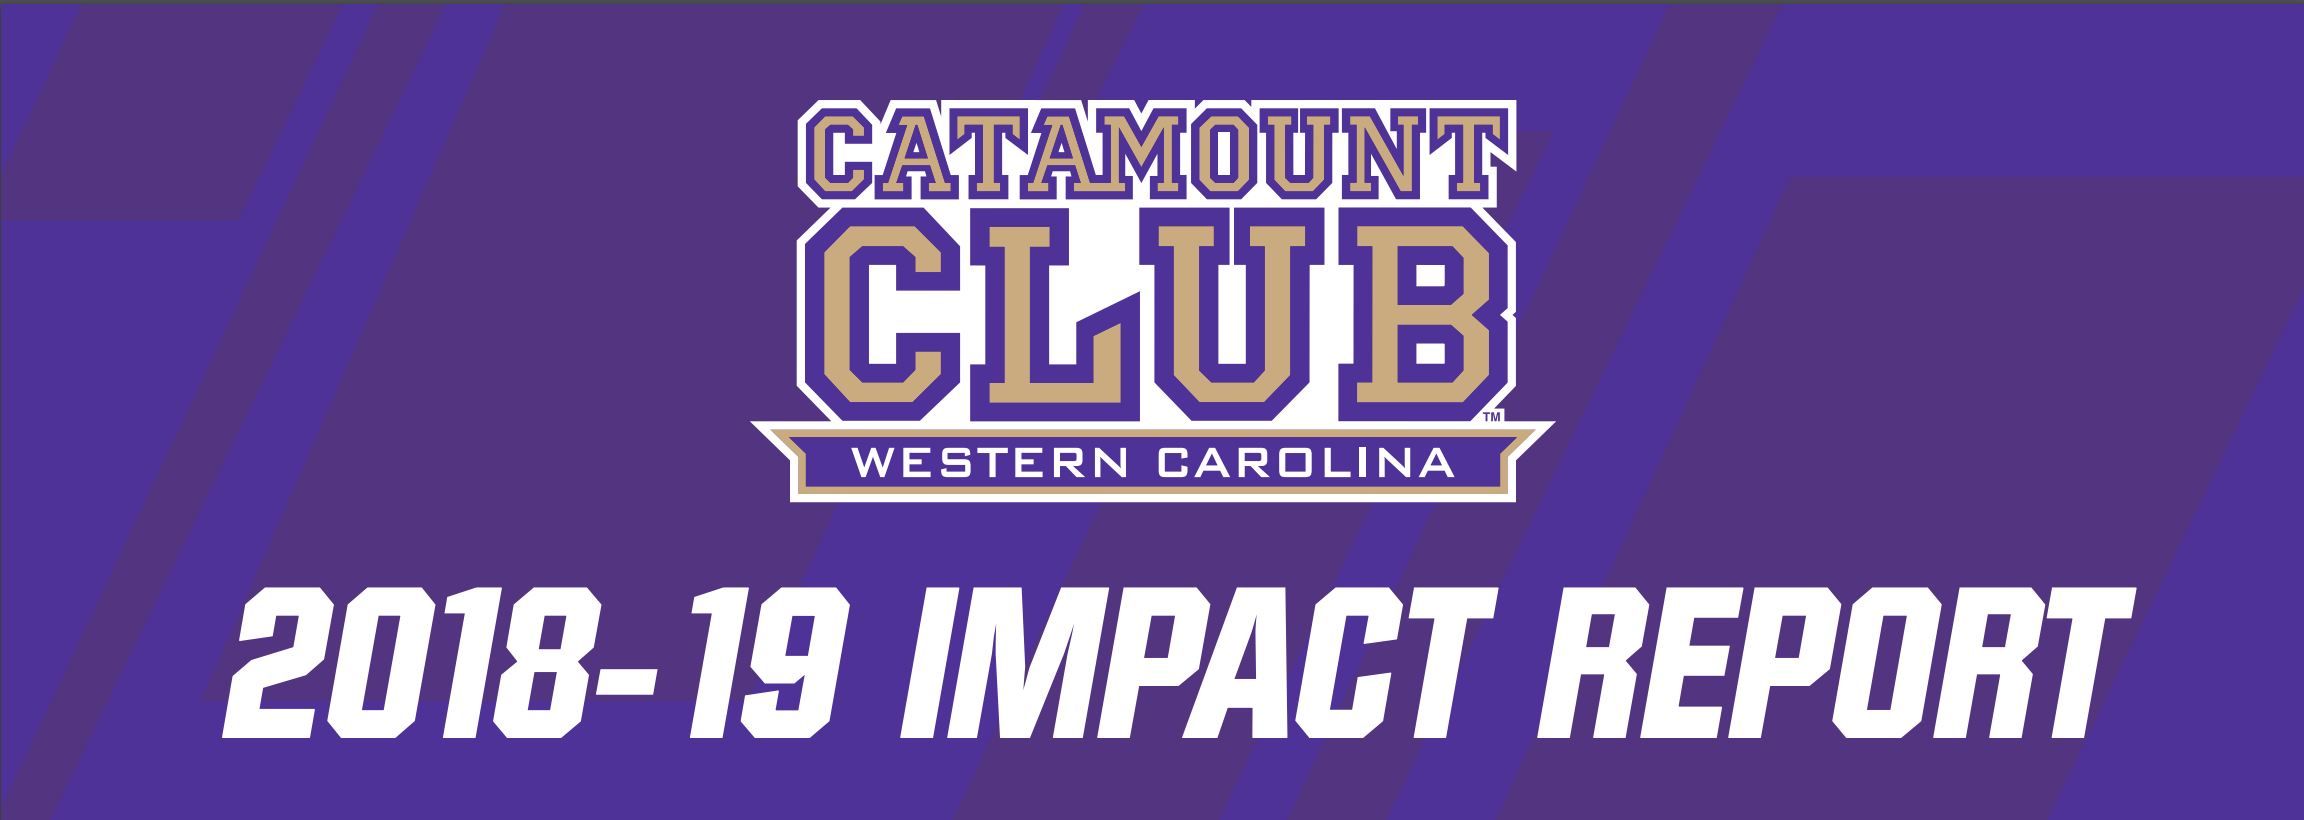 Catamount Club logo with text "2019 Impact Report"